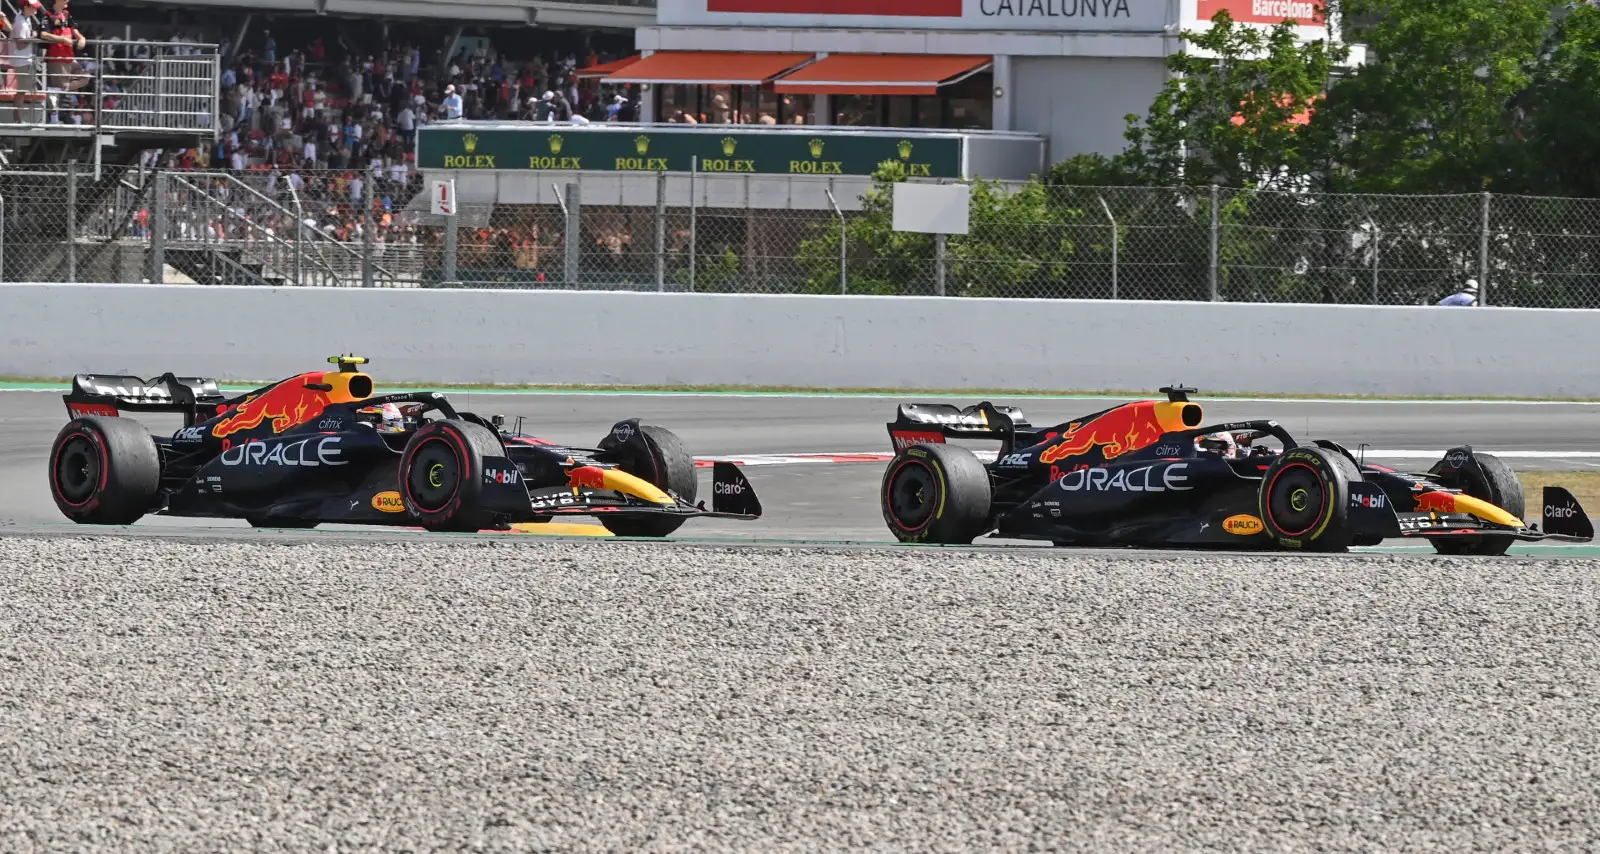 Max Verstappen and Sergio Perez follow each other. Spain May 2022.